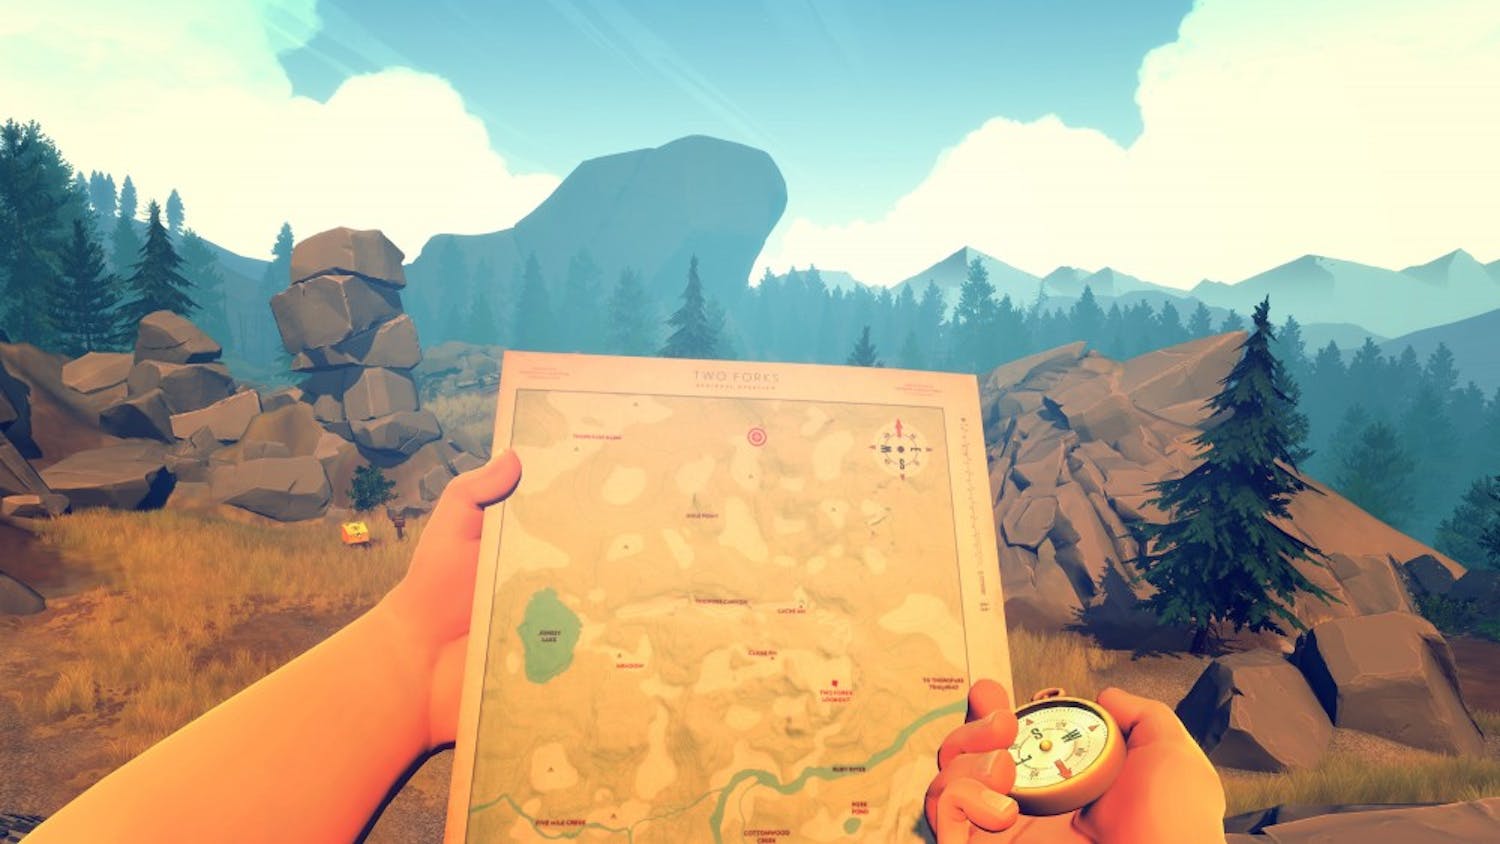 'Firewatch' released on Feb. 9 with beautiful graphics and a cutting-edge method of video-game storytelling.